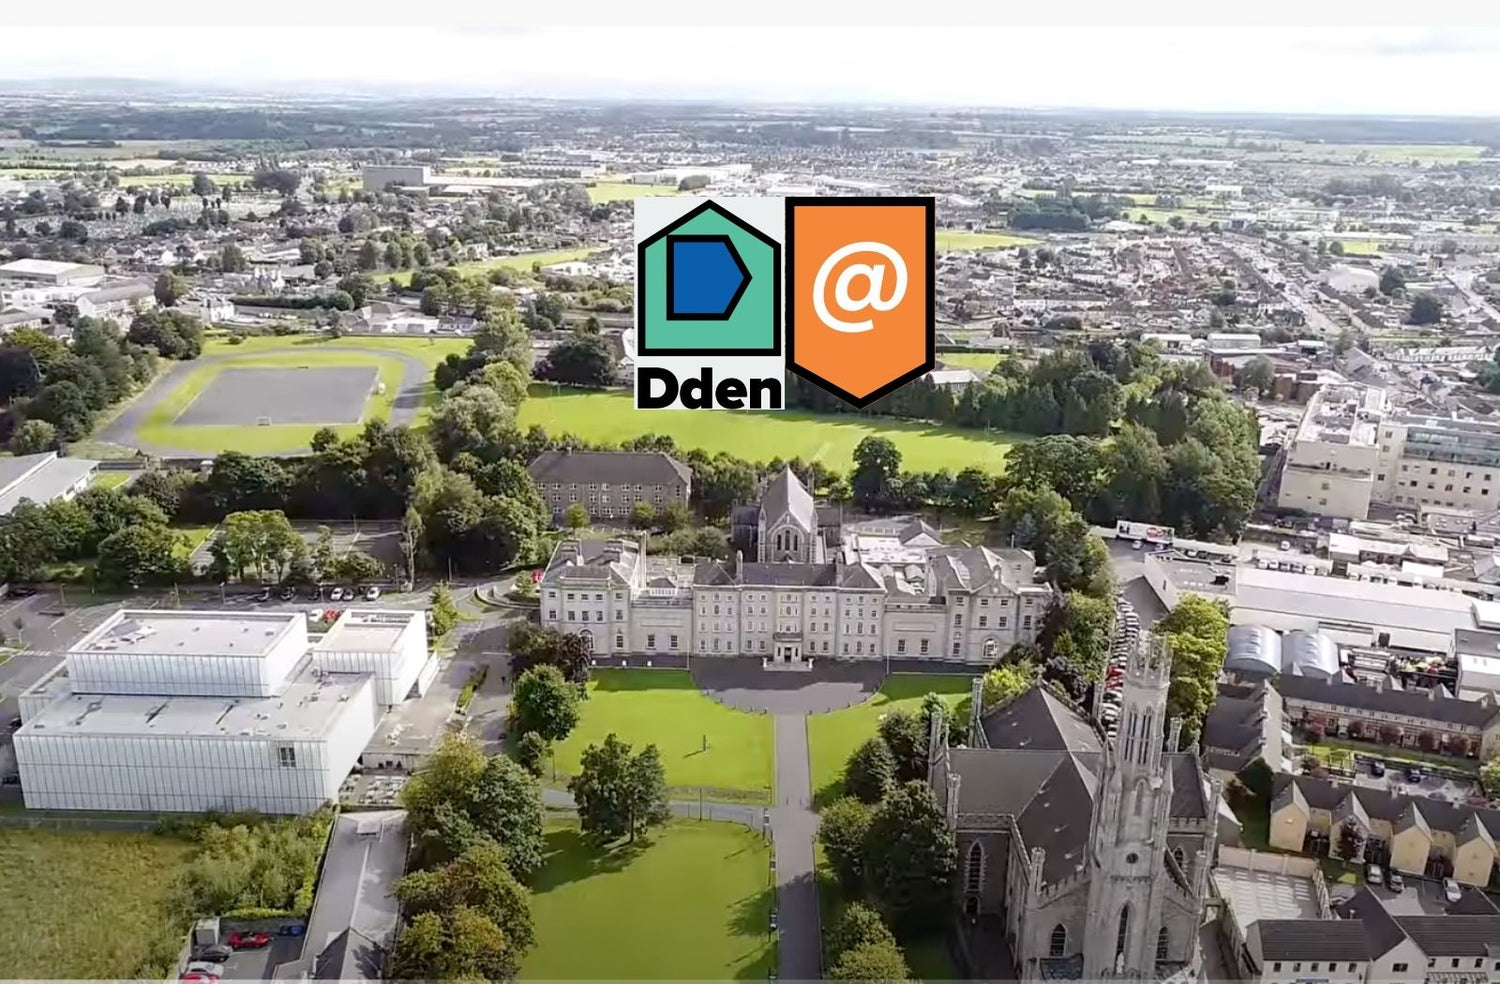 Arial view of Carlow College, St Patricks , the Visual and Cathederal with D den summer camps logo